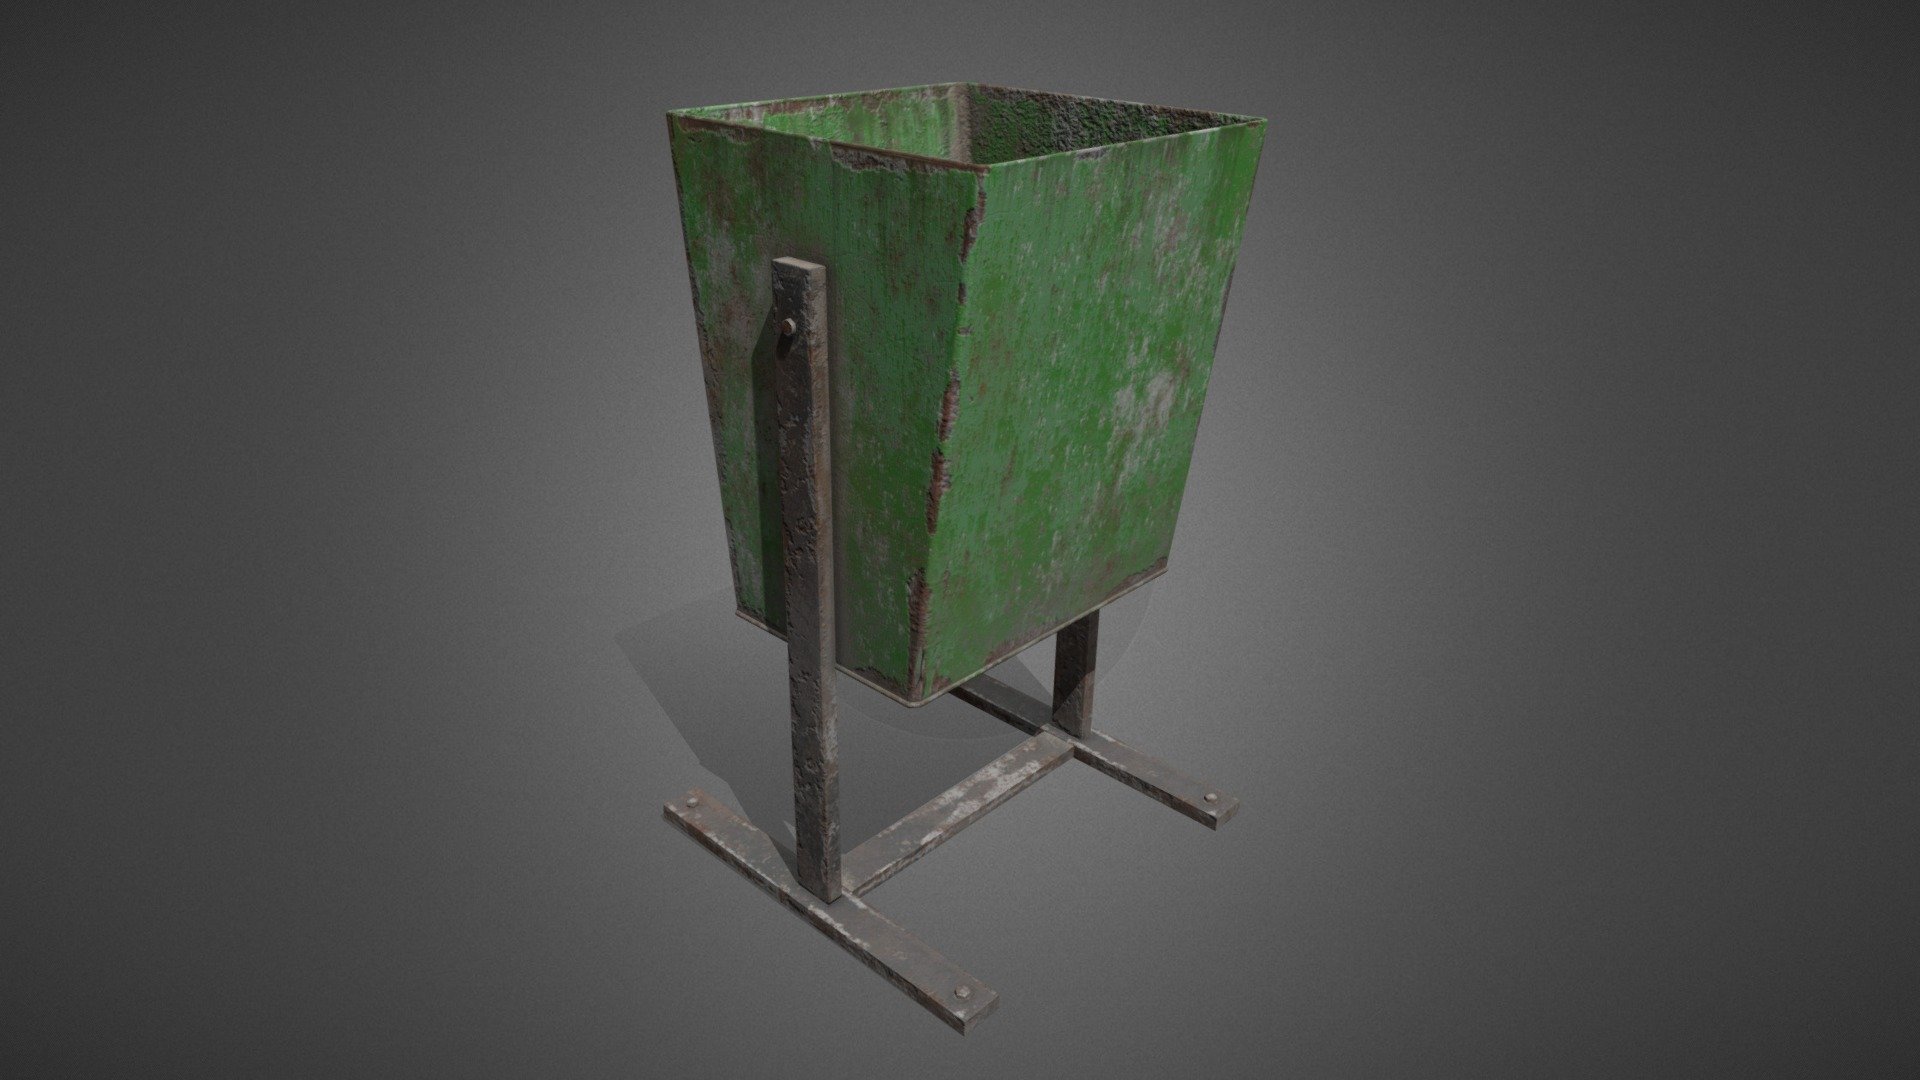 Low-poly, game-ready model of a Trash Can / Garbage Bin.

TEXTURES

High resolution PBR Metal/Roughness textures are provided in the additional files.

Texture size: 2048 x 2048
Texture format: PNG 8 bit (uncompressed)




Base Color (Diffuse)

Metallic

Roughness

Height

Normal 

Ambient Occlusion

This asset is part of our Hangar collection - Trash Can - Buy Royalty Free 3D model by Ringtail Studios (@ringtail) 3d model